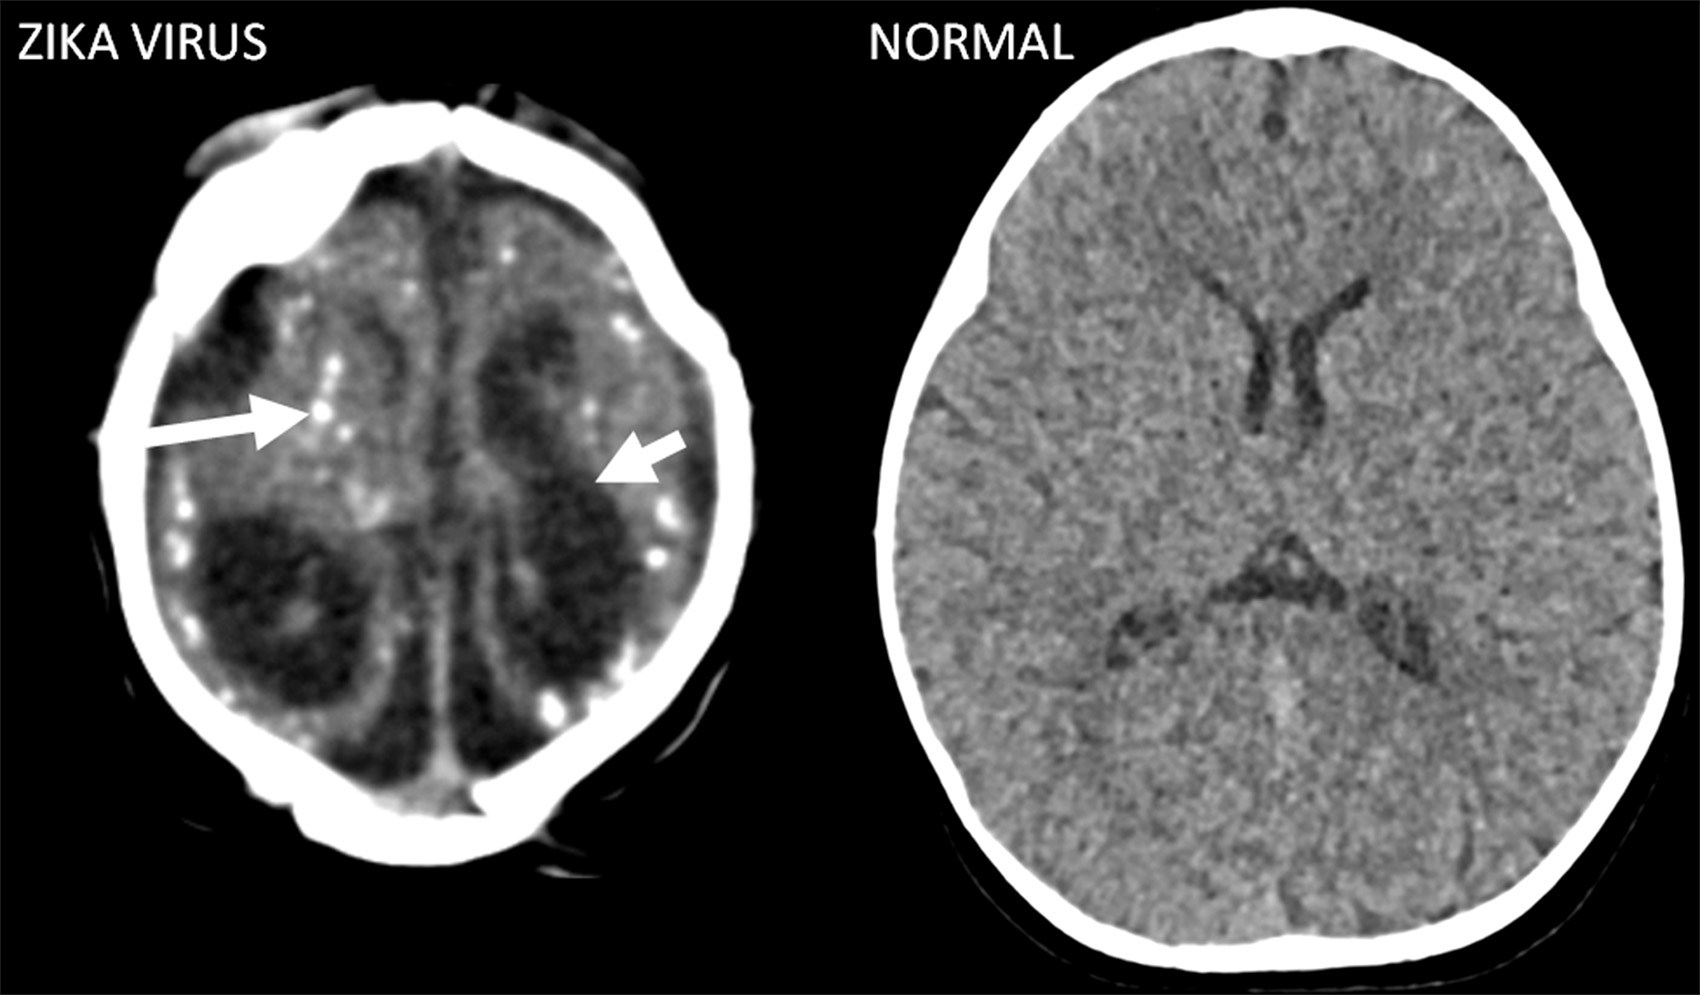 On the left is the CT image of the brain of a 4-month-old with Zika-caused microcephaly. The long arrow points to a bright white calcium deposit; other deposits are scattered through the brain. The short arrow points to a large black splotch; this is a swollen ventricle. The grey is the normal brain tissue that has managed to grow around the damaged areas. For comparison, on the right is the image of a typical 5-month-old baby’s brain; notice that it has no white calcium deposits, and the black ventricles are small and symmetrical. The entire skull is filled with normal brain tissue.